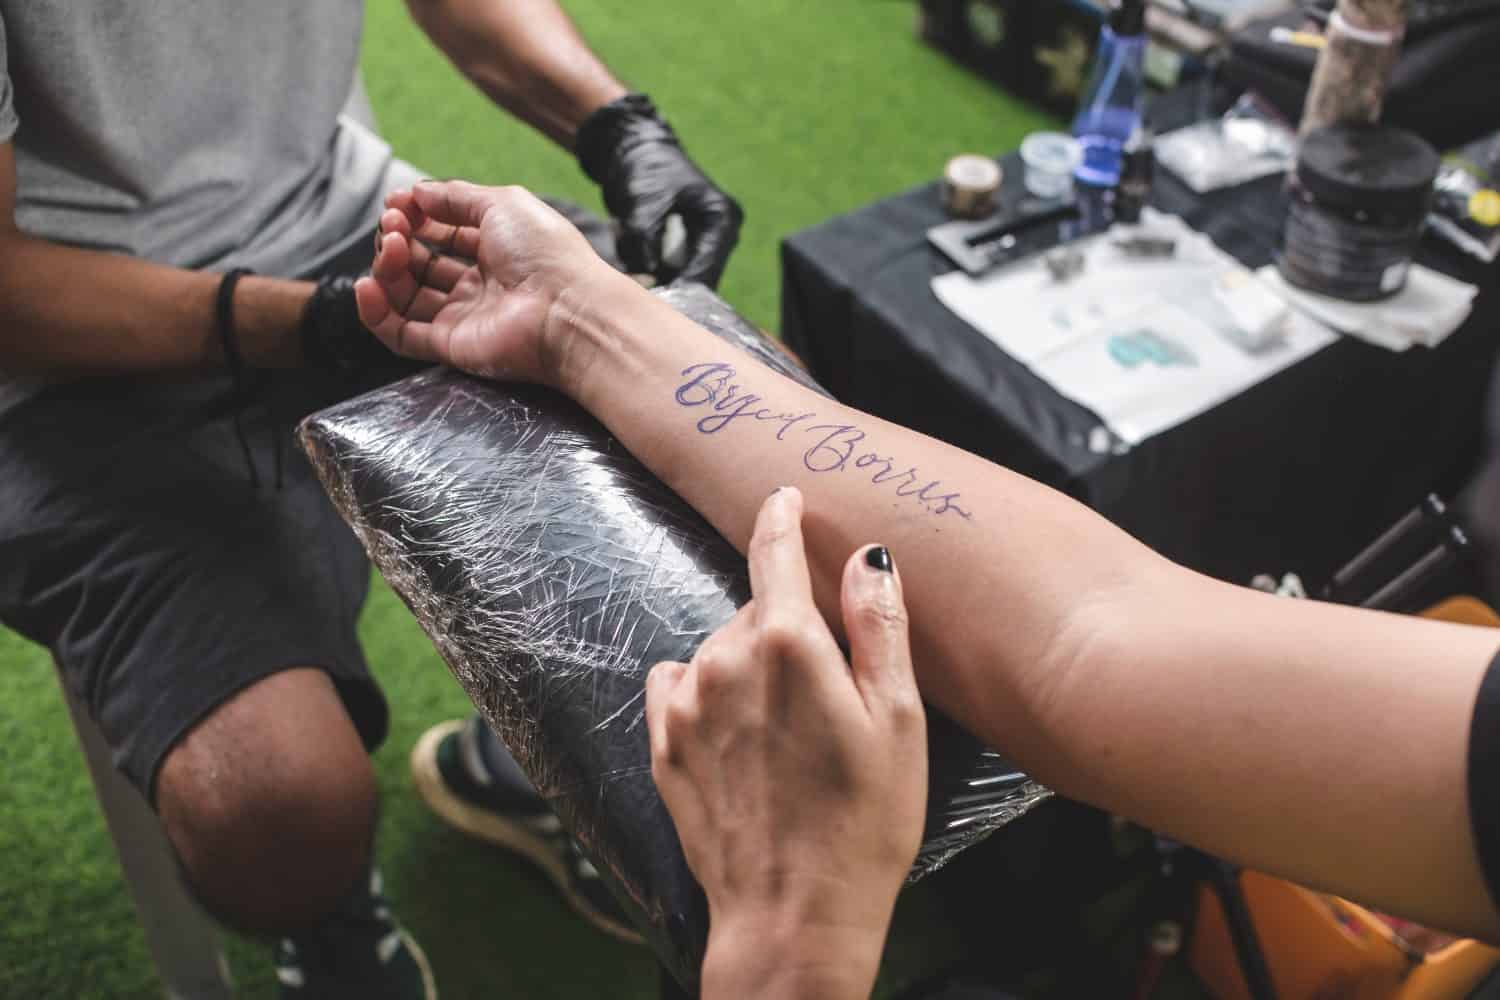 An outline of a cursive name on a client's forearm prior to the actual tattoo procedure.